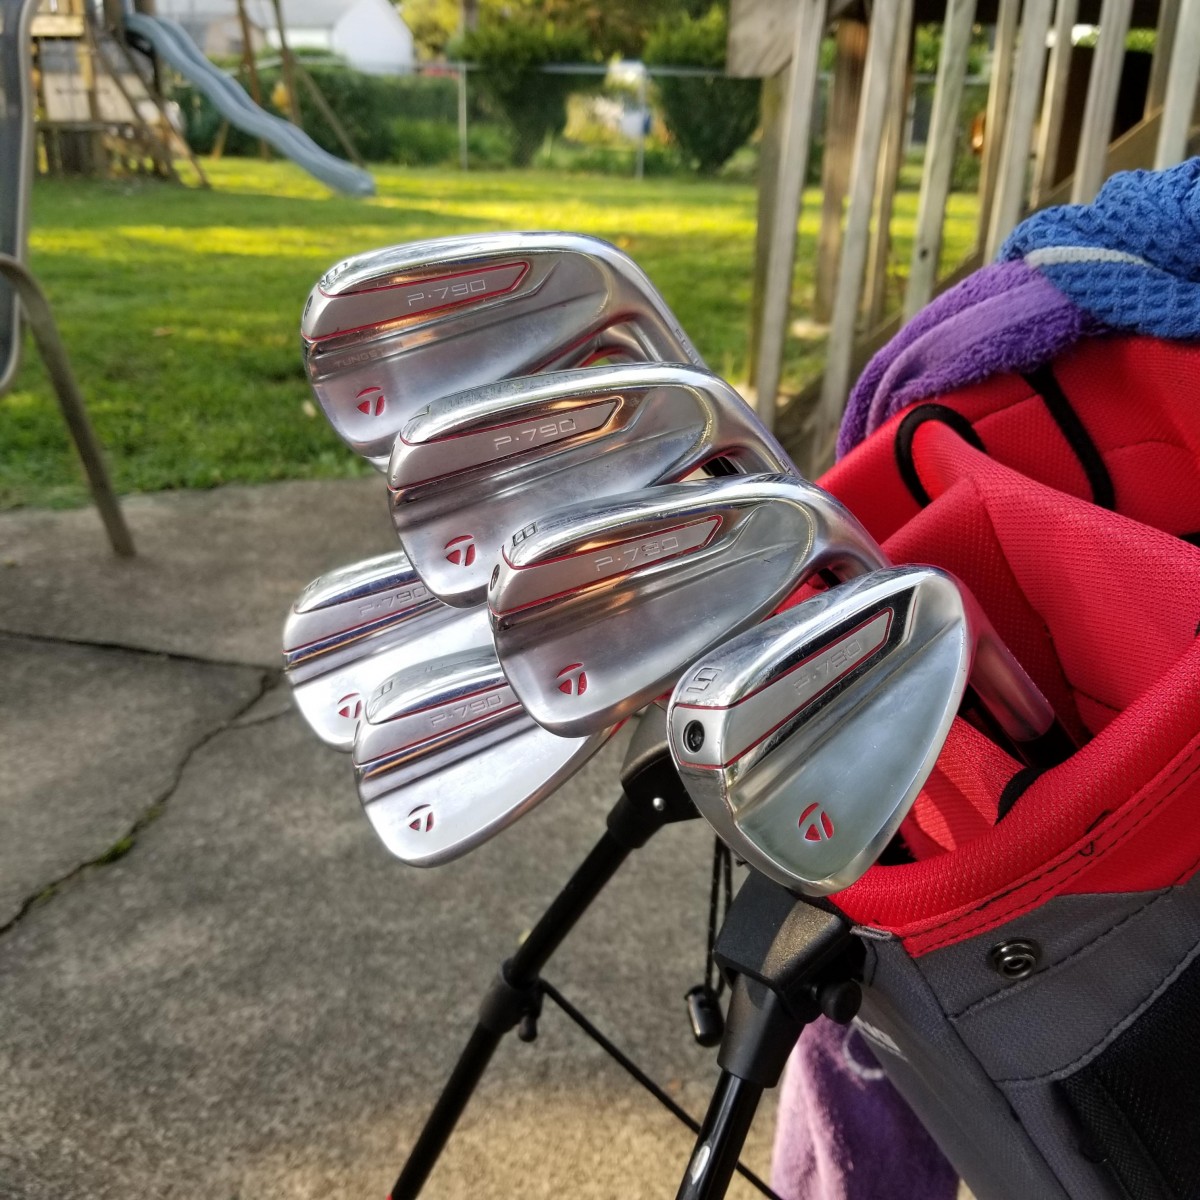 Paint Fill on Irons and wedges - Golf Clubs - MyGolfSpy Forum